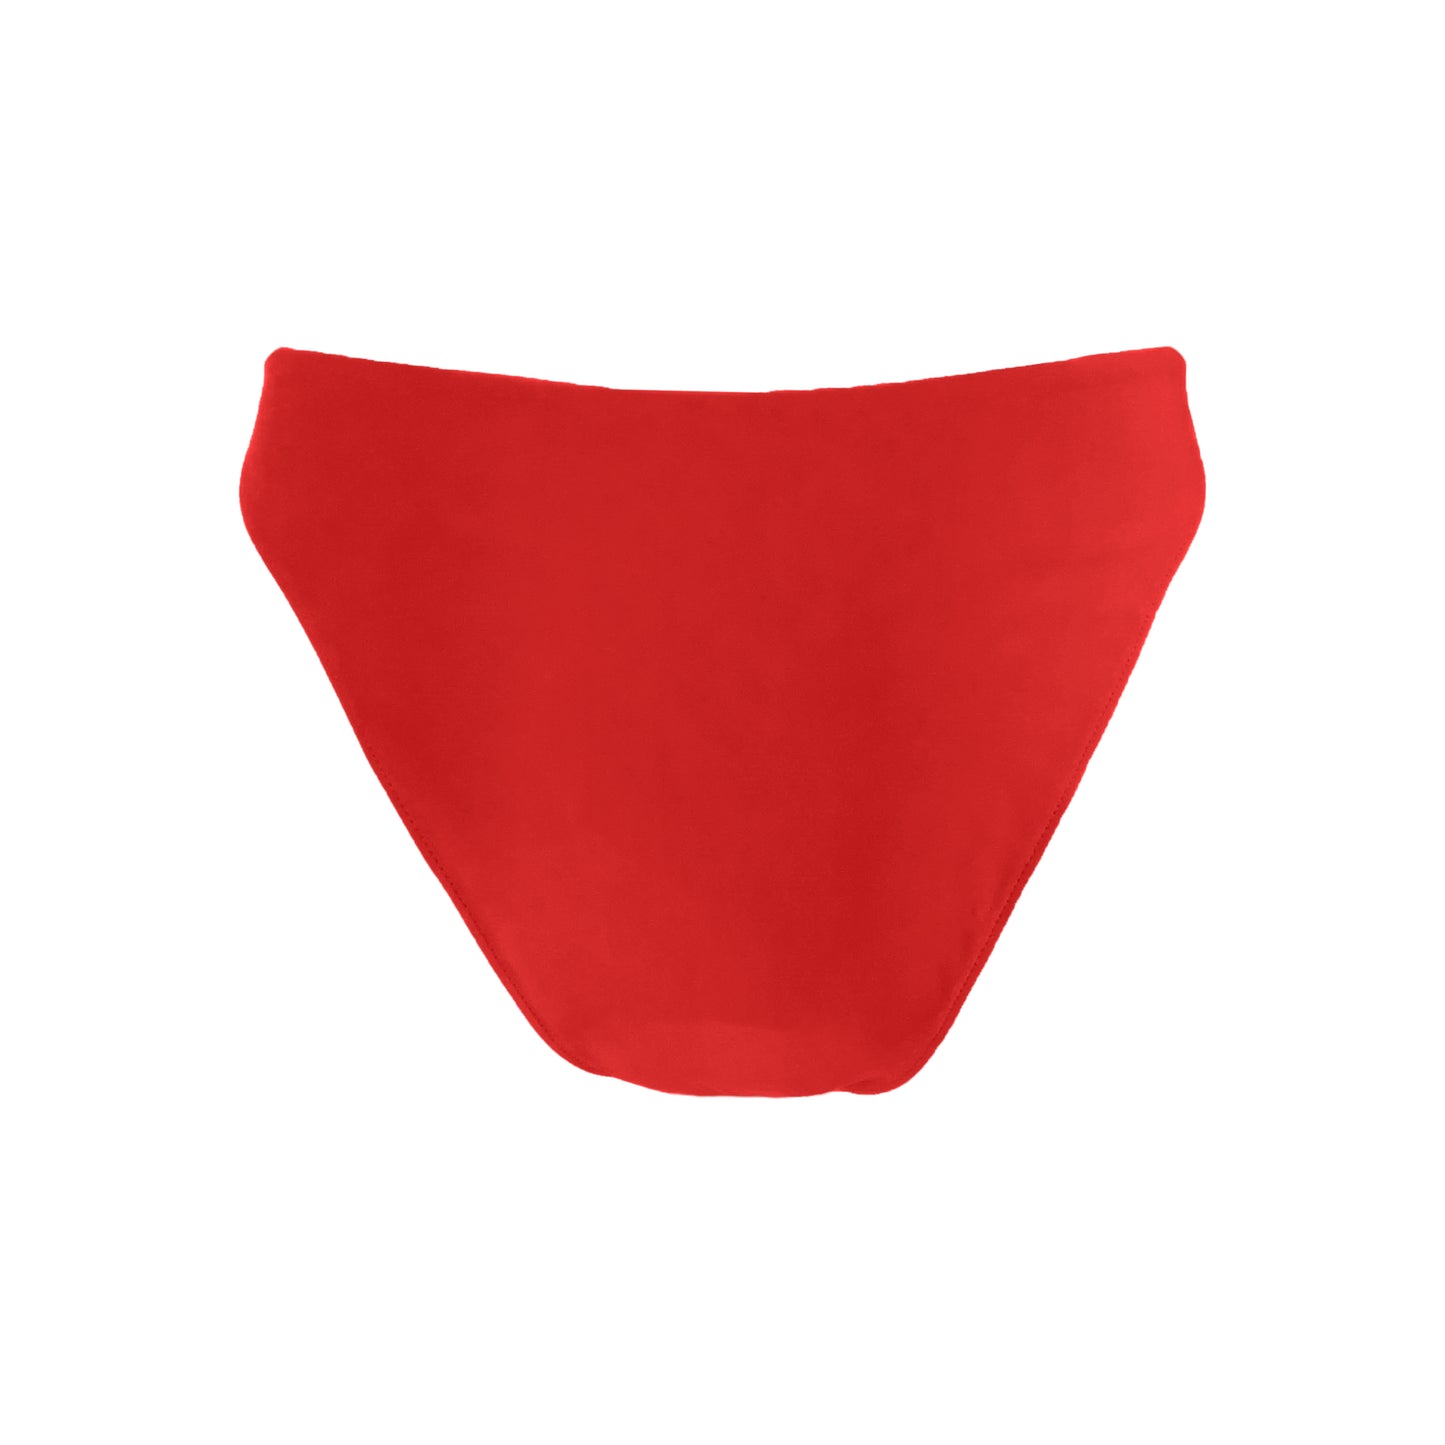 Back view of red v shape mid rise bikini bottom with asymmetric seam detail, high cut sides and cheeky bum coverage.